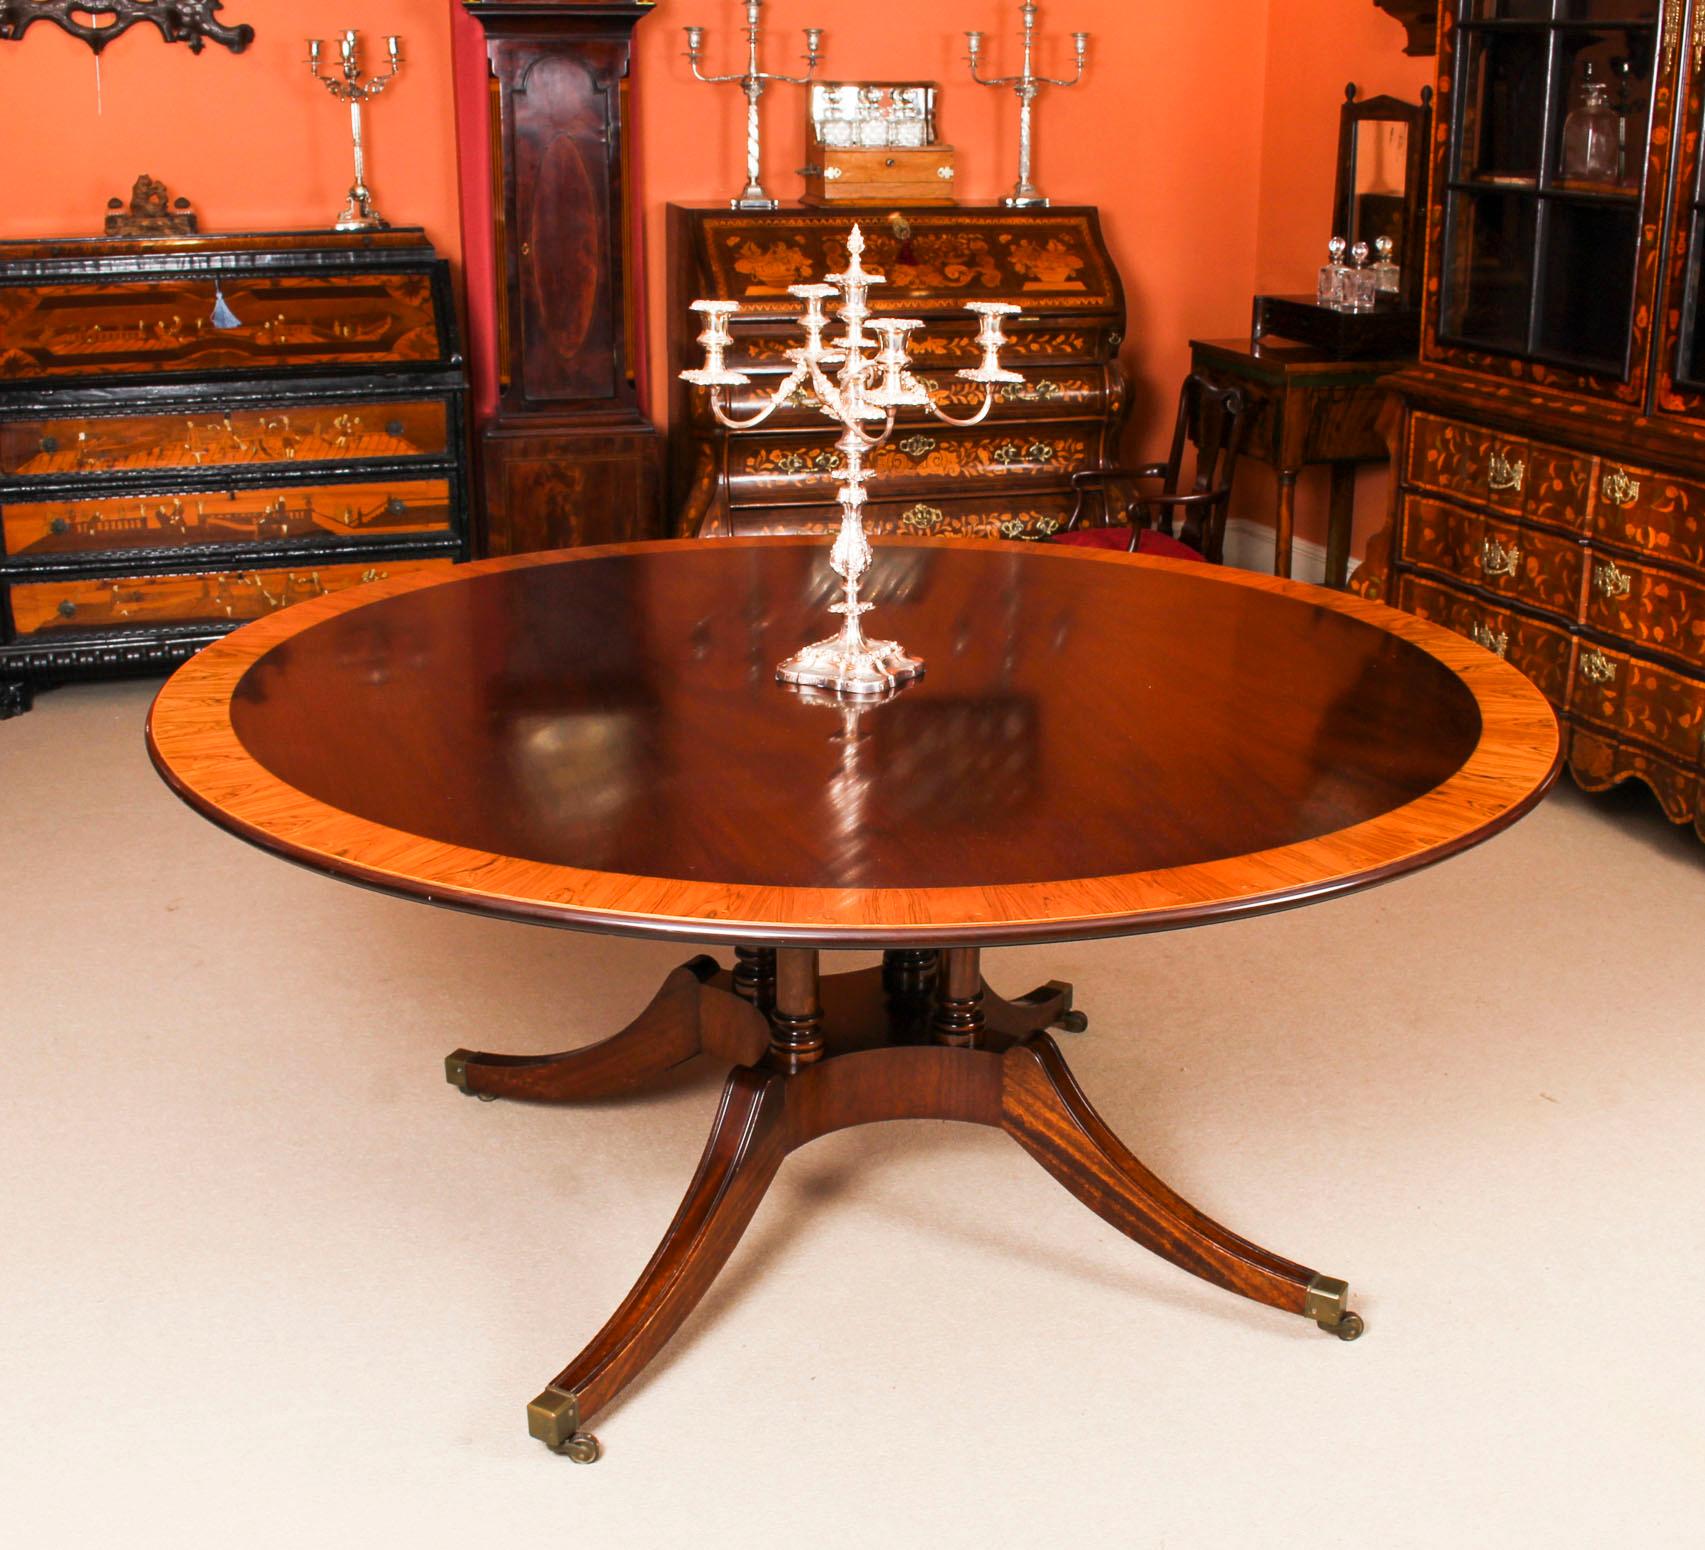 Regency Vintage Round Table by Millwood and 6 Dining Chairs, 20th Century